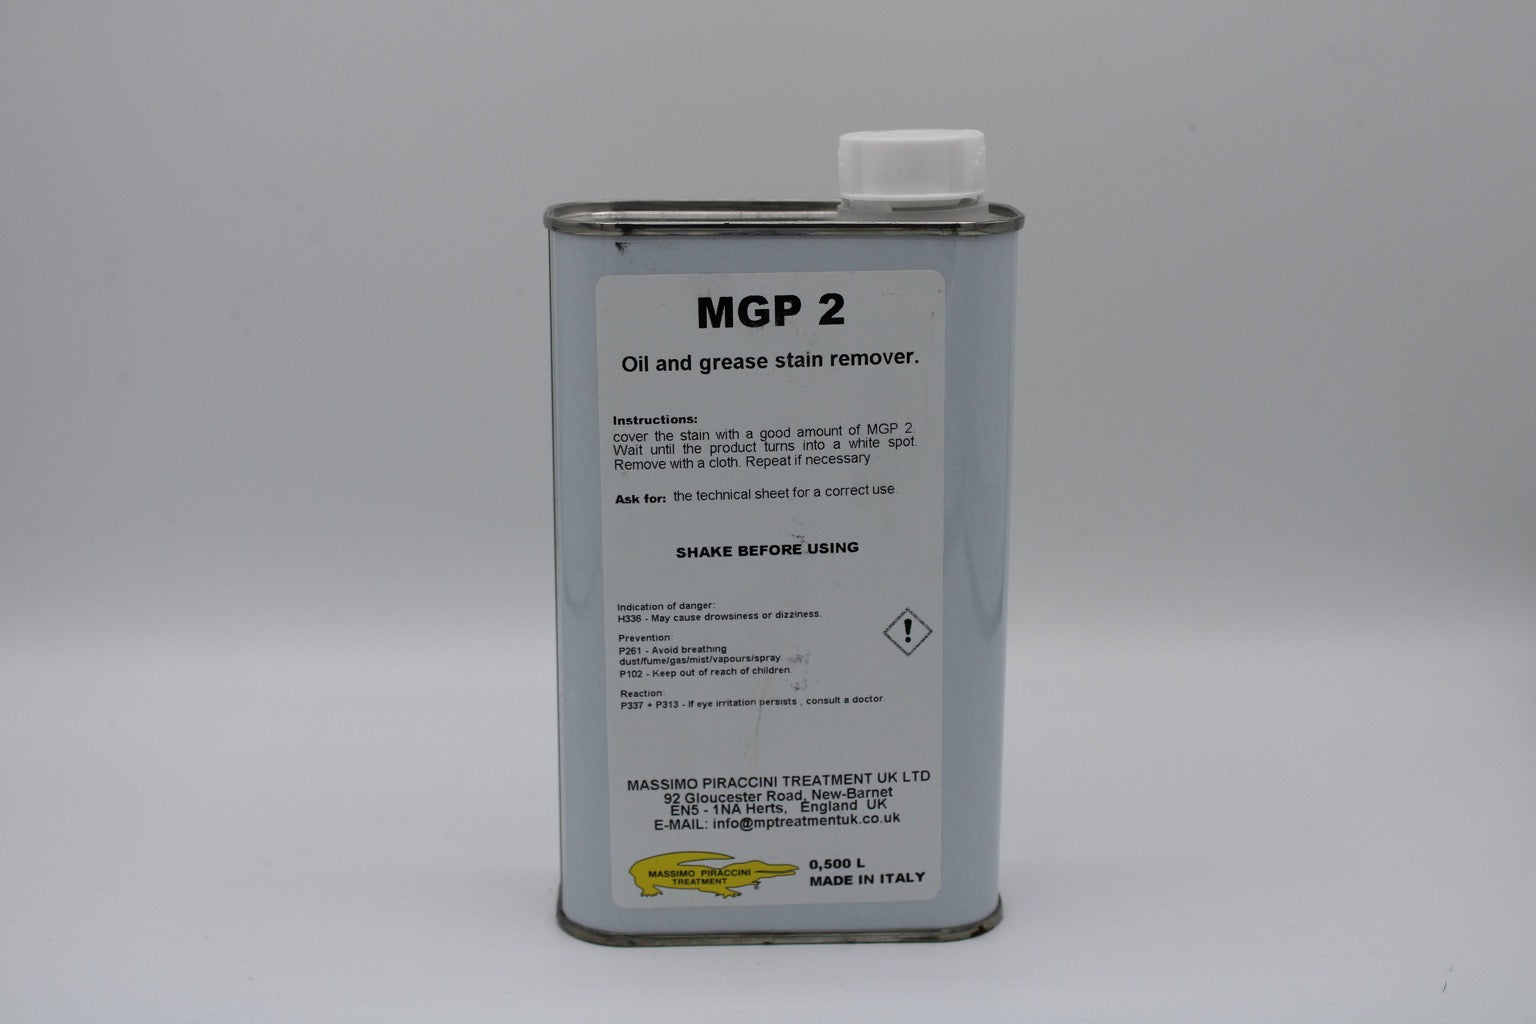 MGP 2 - Stain remover for oily stains